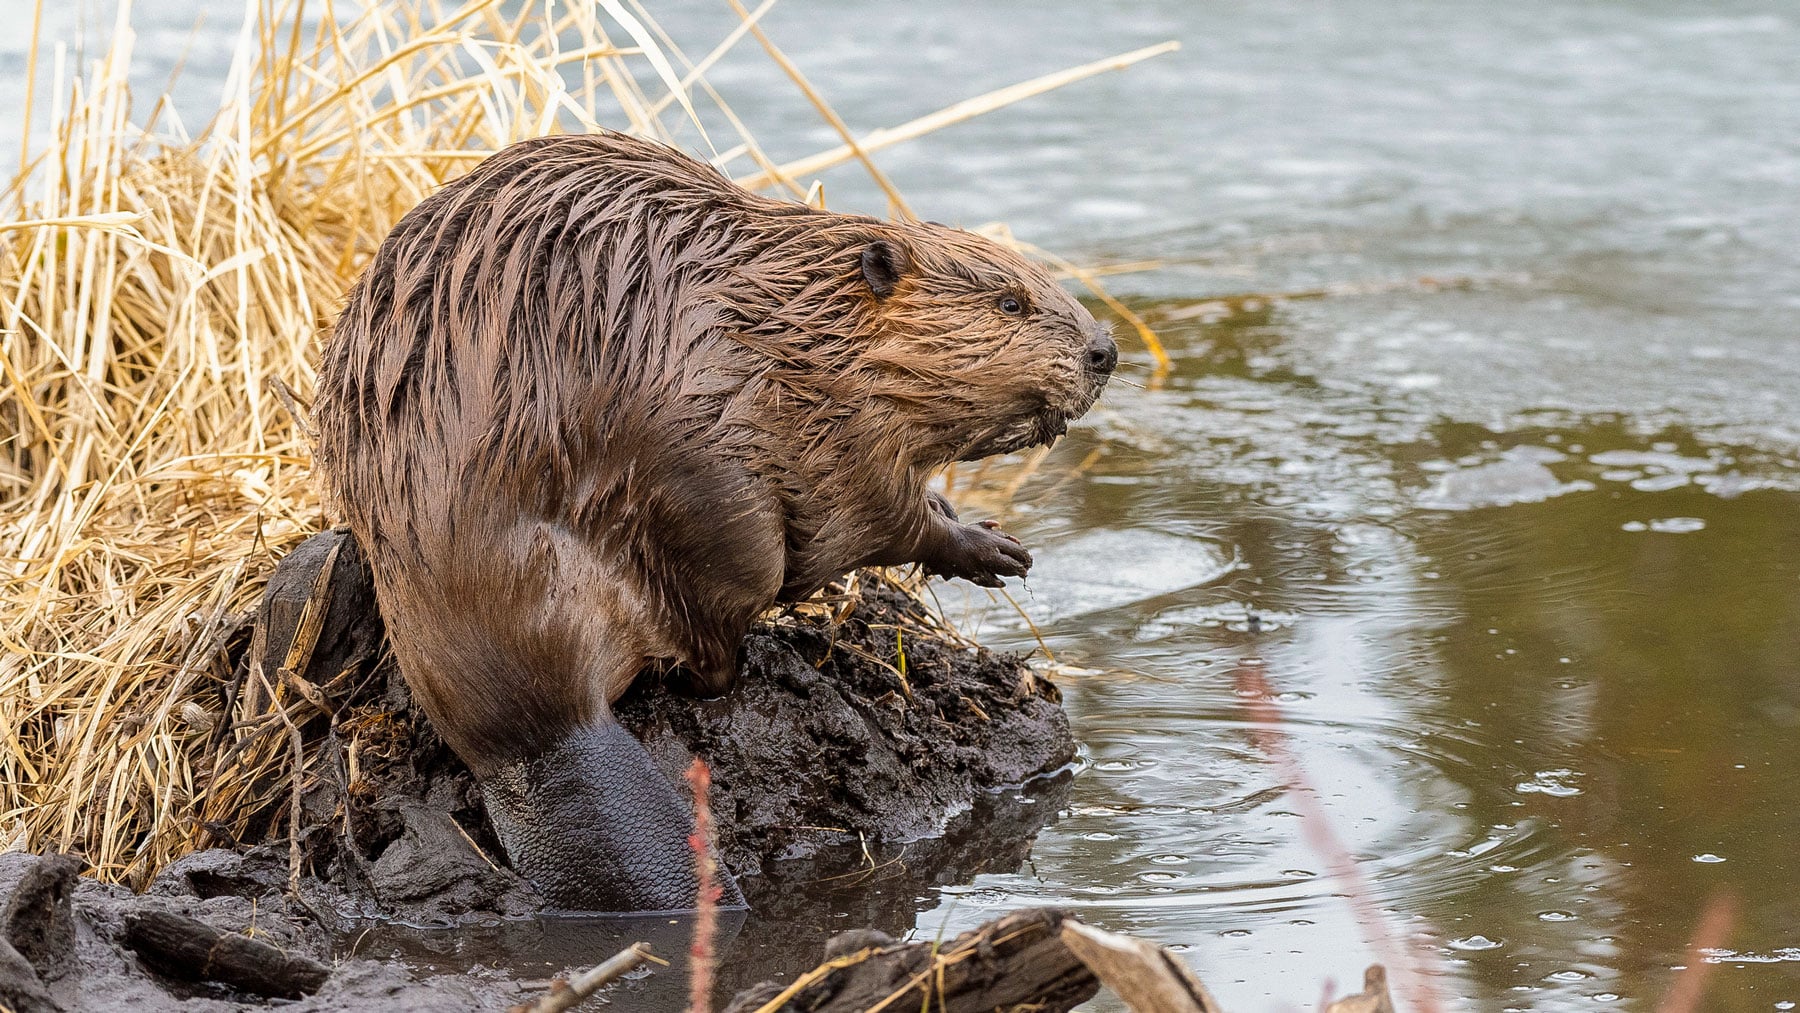 Beavers have been spotted in the Chicago River system